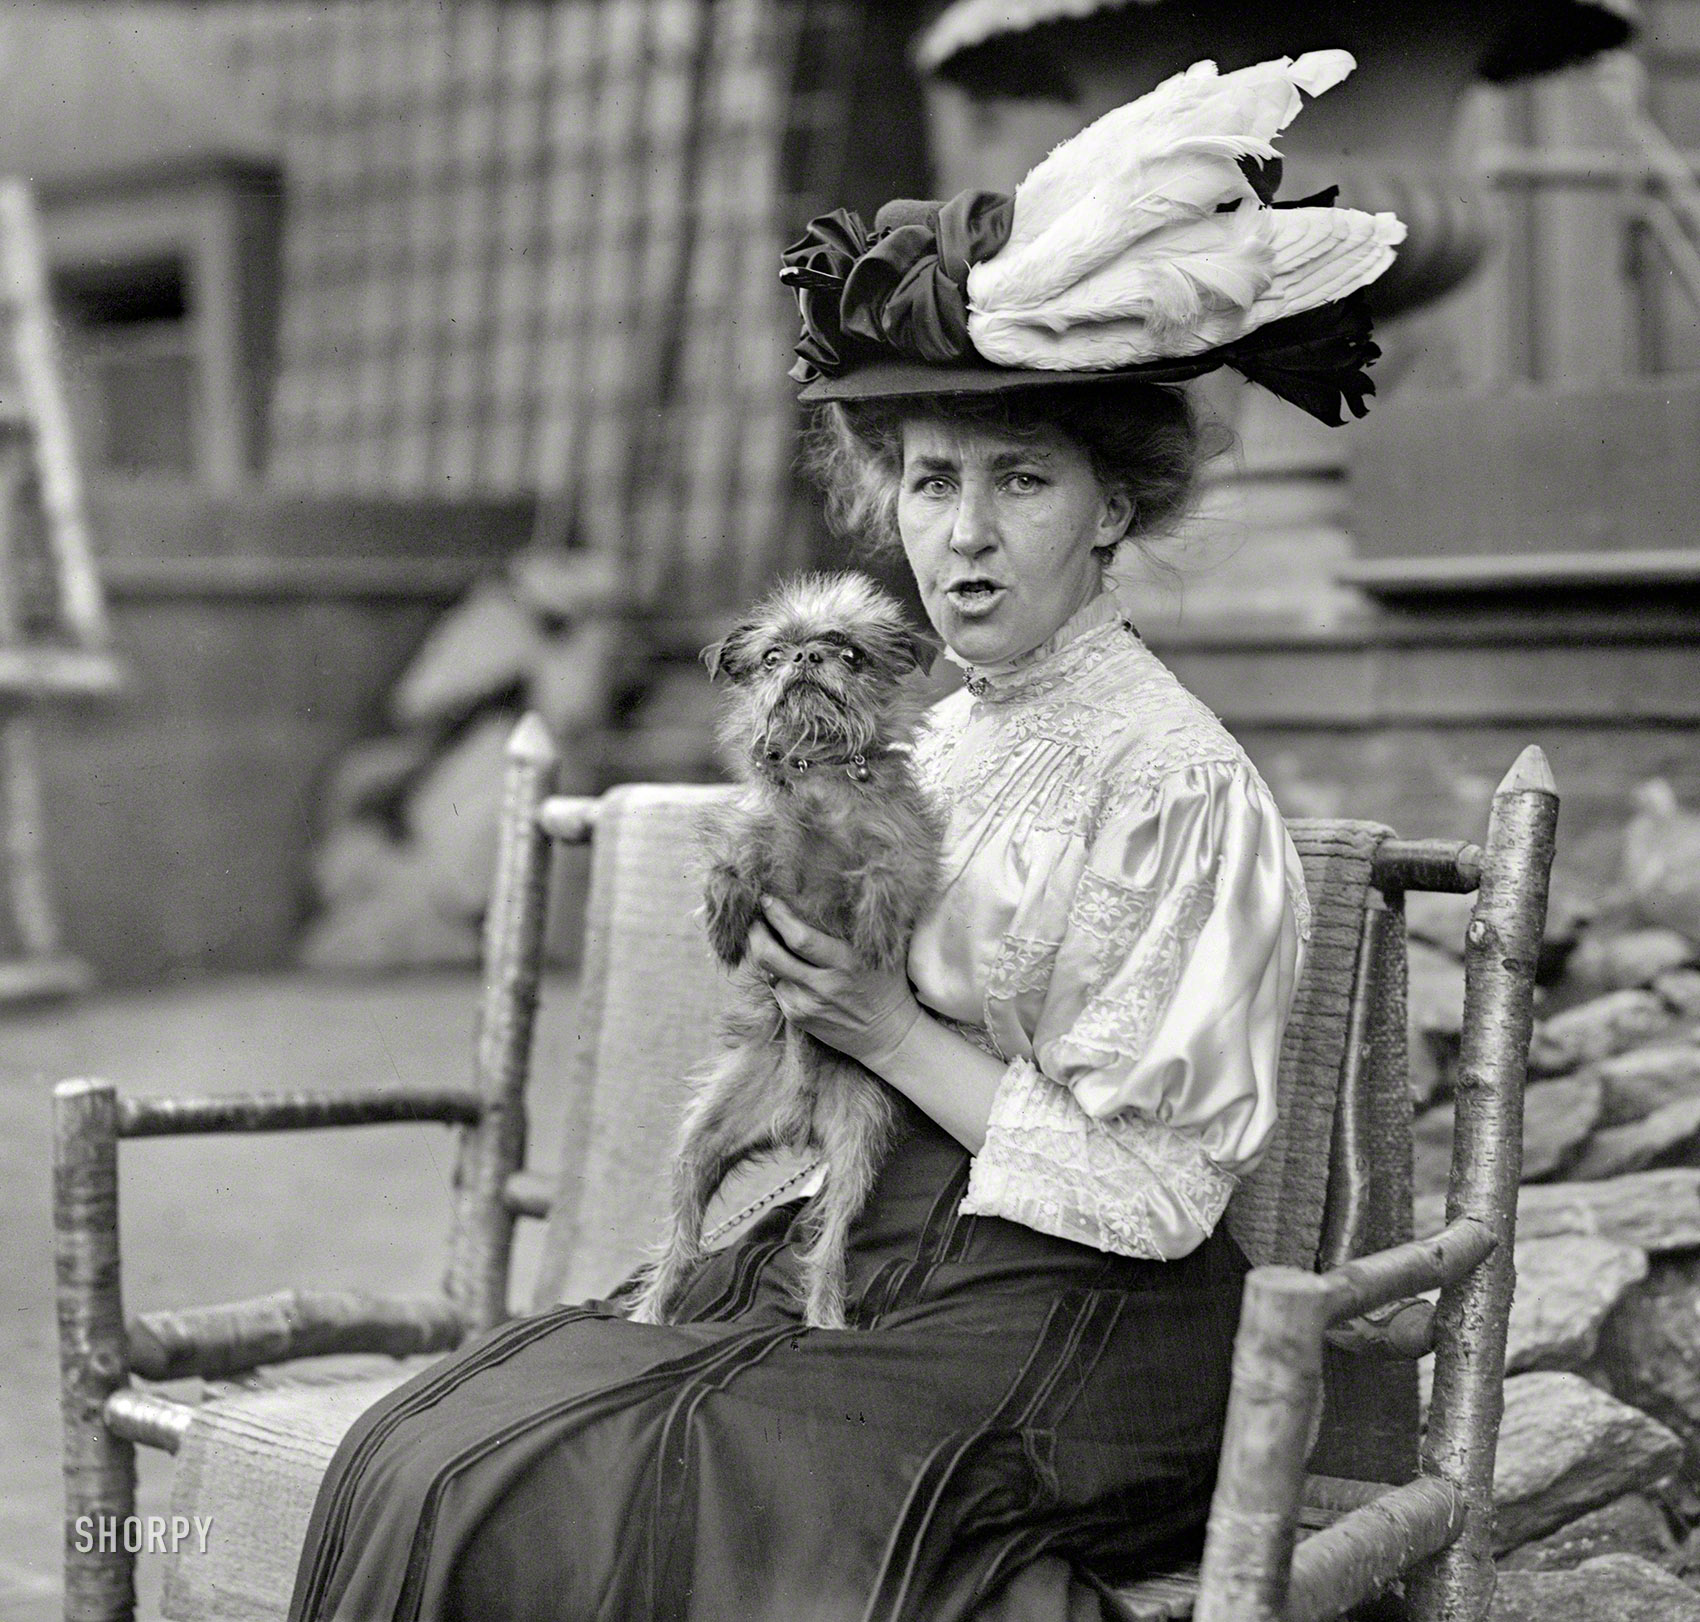 New York circa 1908. "Mary Langley Bruce seated with her Griffon Bruxellois, 'Cupid'." 5x7 glass negative, Bain News Service. View full size.